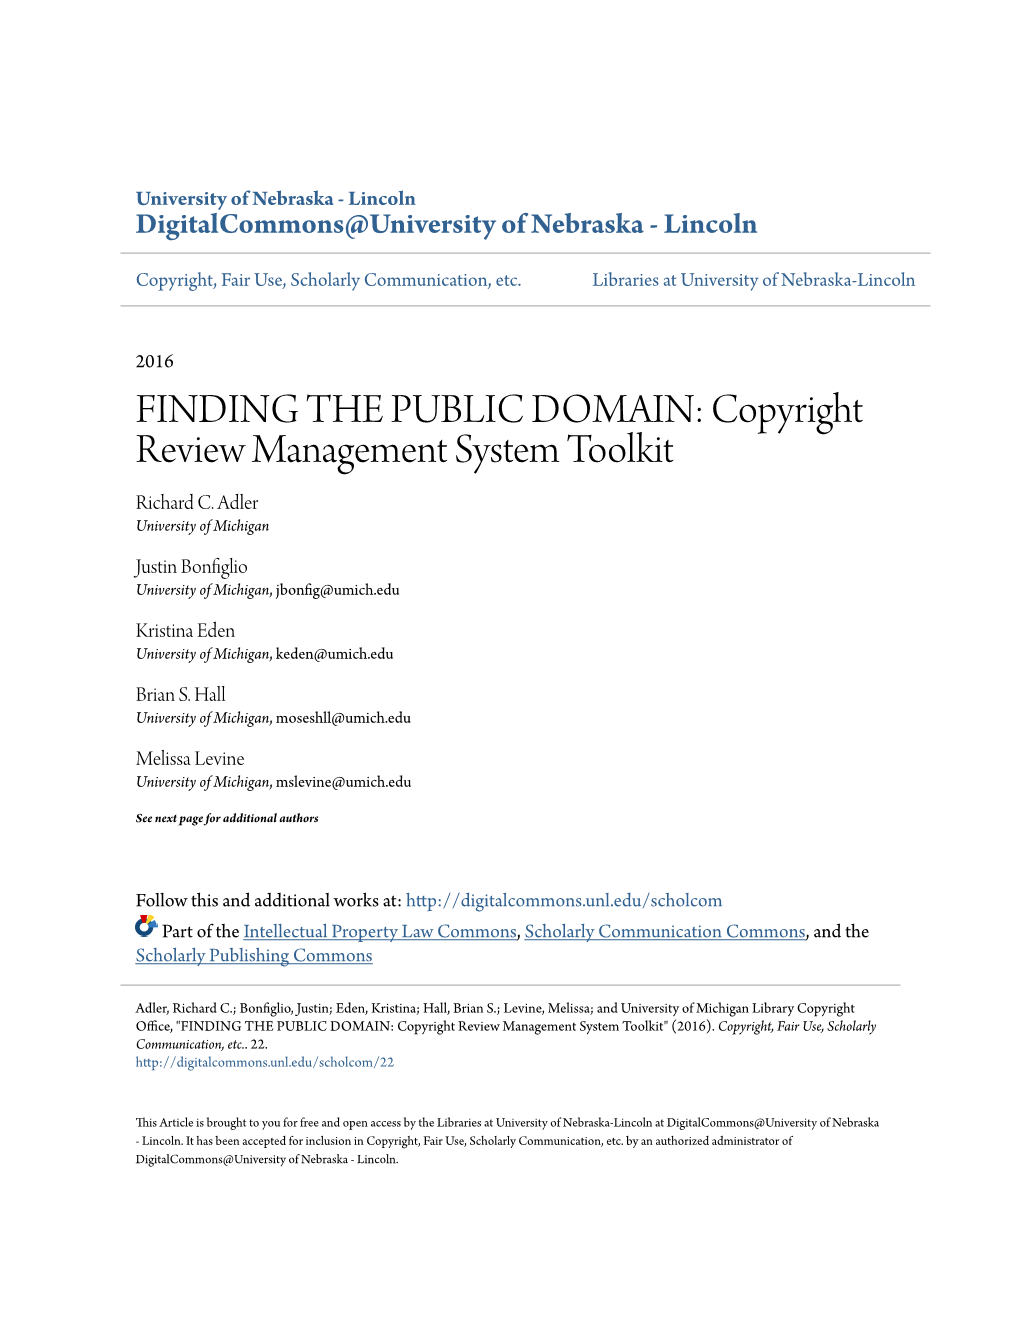 Copyright Review Management System Toolkit Richard C